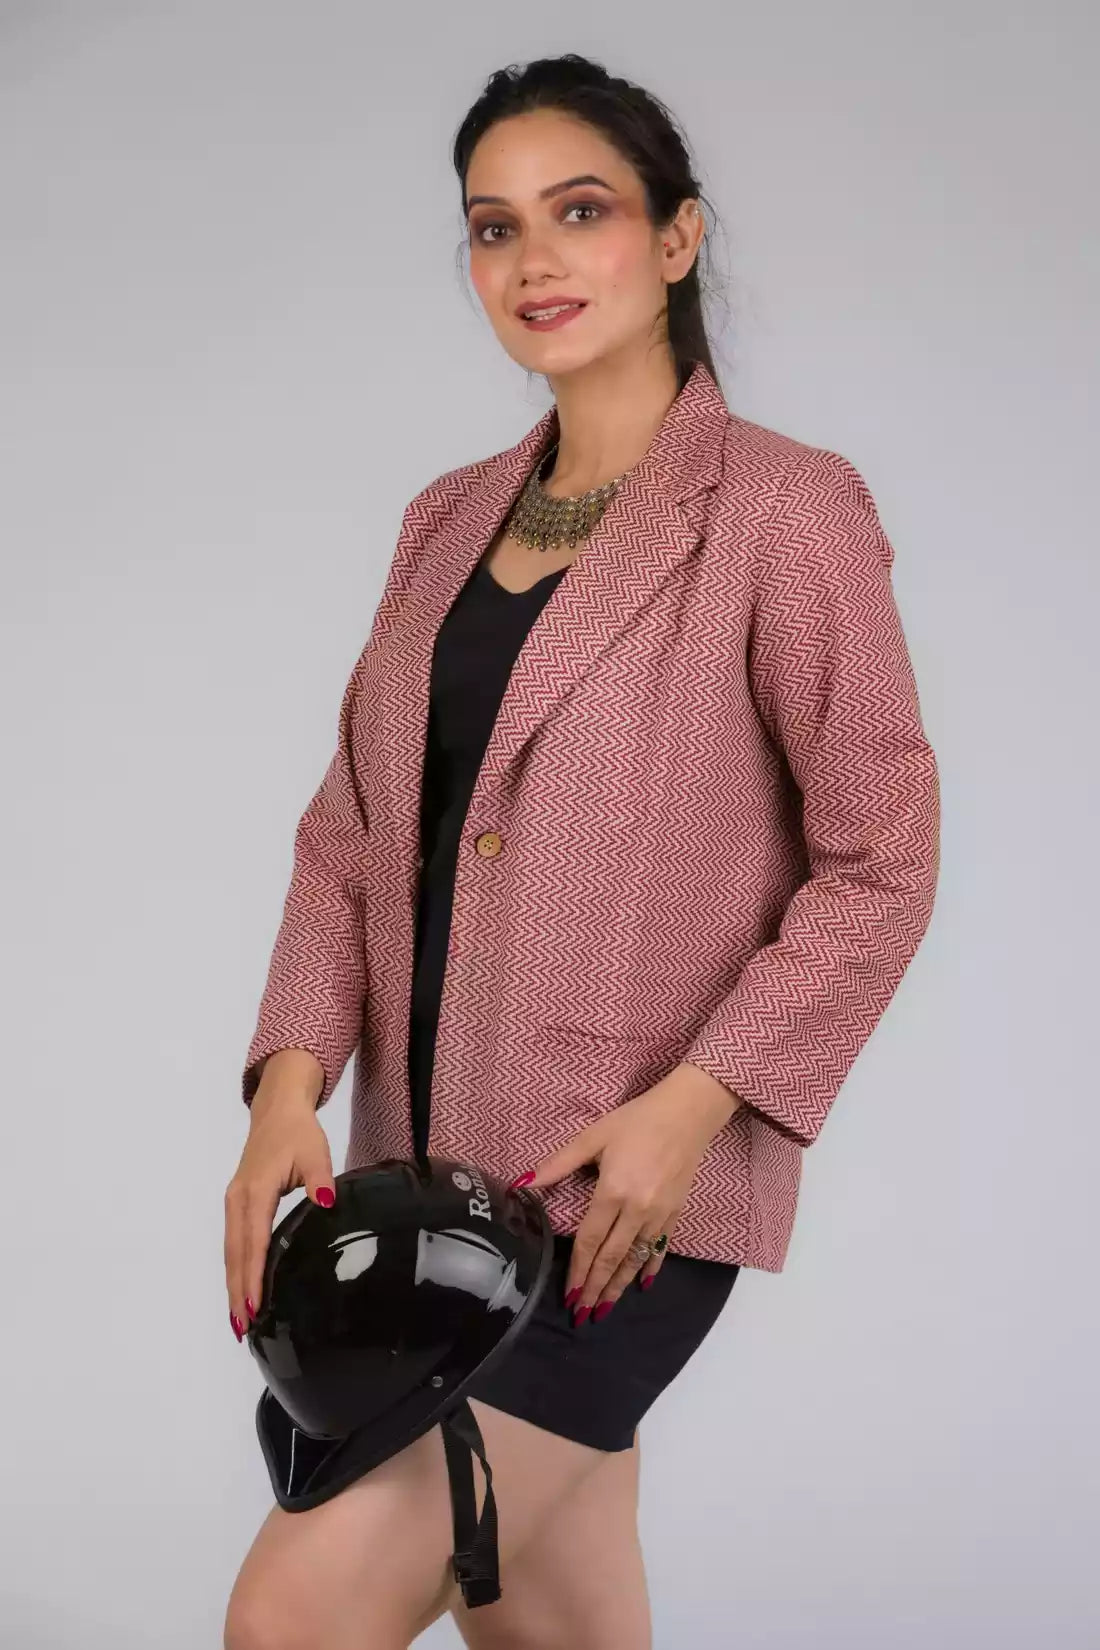 A Women in Chevron Red Blazer In Pure Cotton, womens workwear standing against a grey background